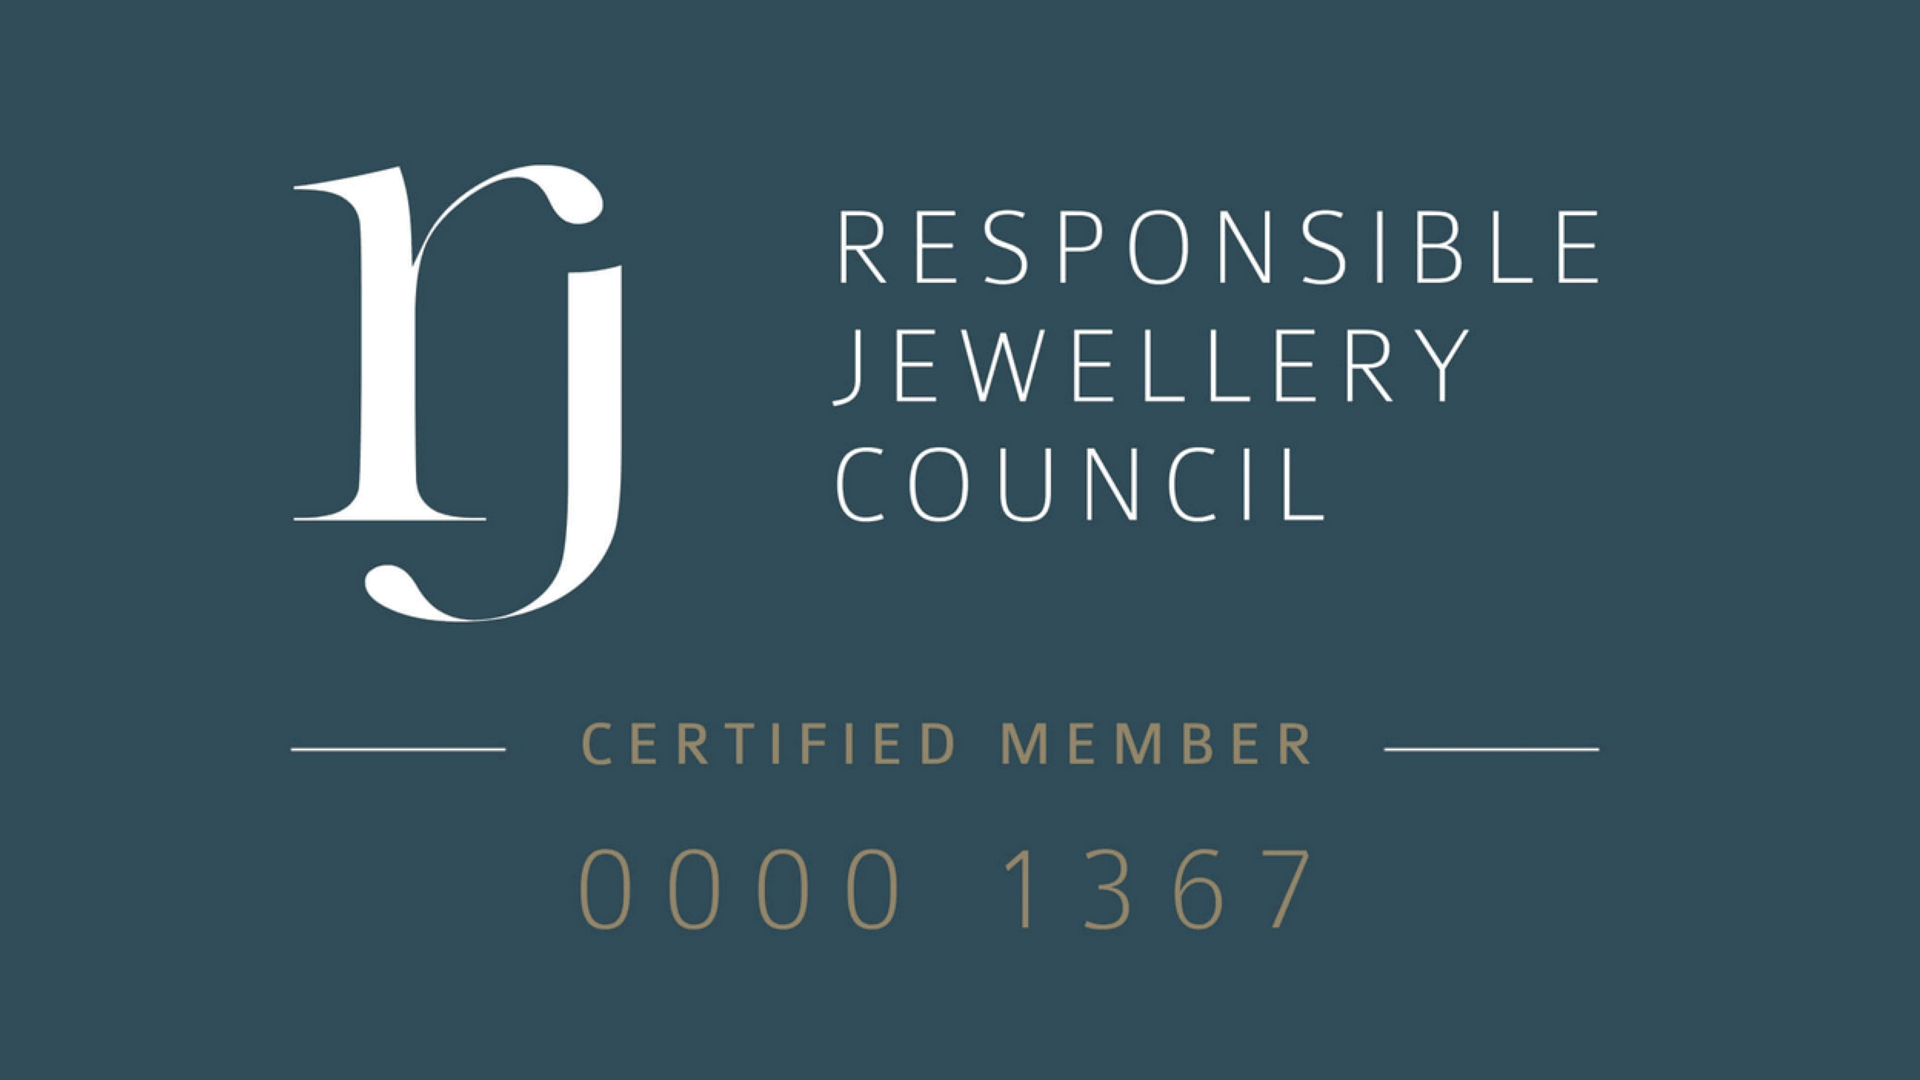 Horlyne becomes a member of the RJC (RESPONSIBLE JEWELERY COUNCIL)